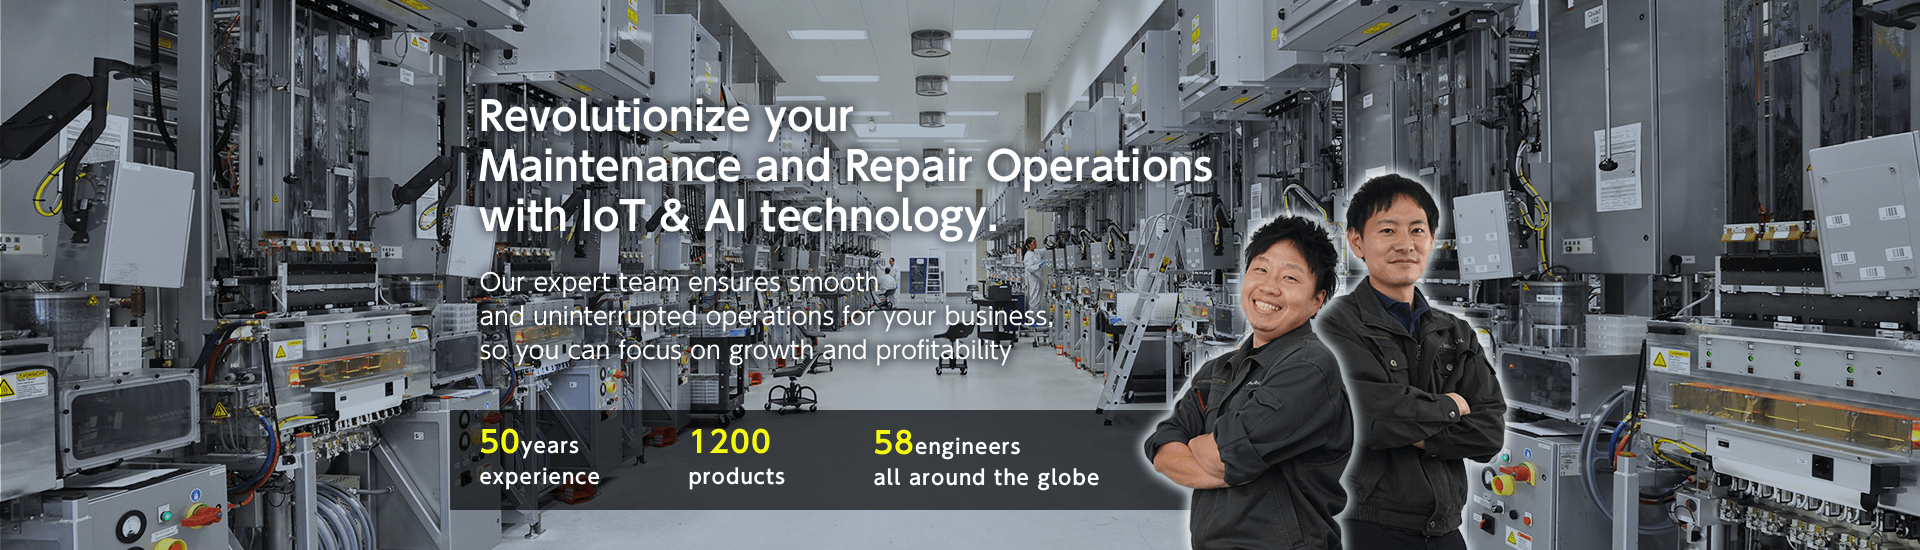 Revolutionize your Maintenance and Repair Operations with IoT & AI technology.